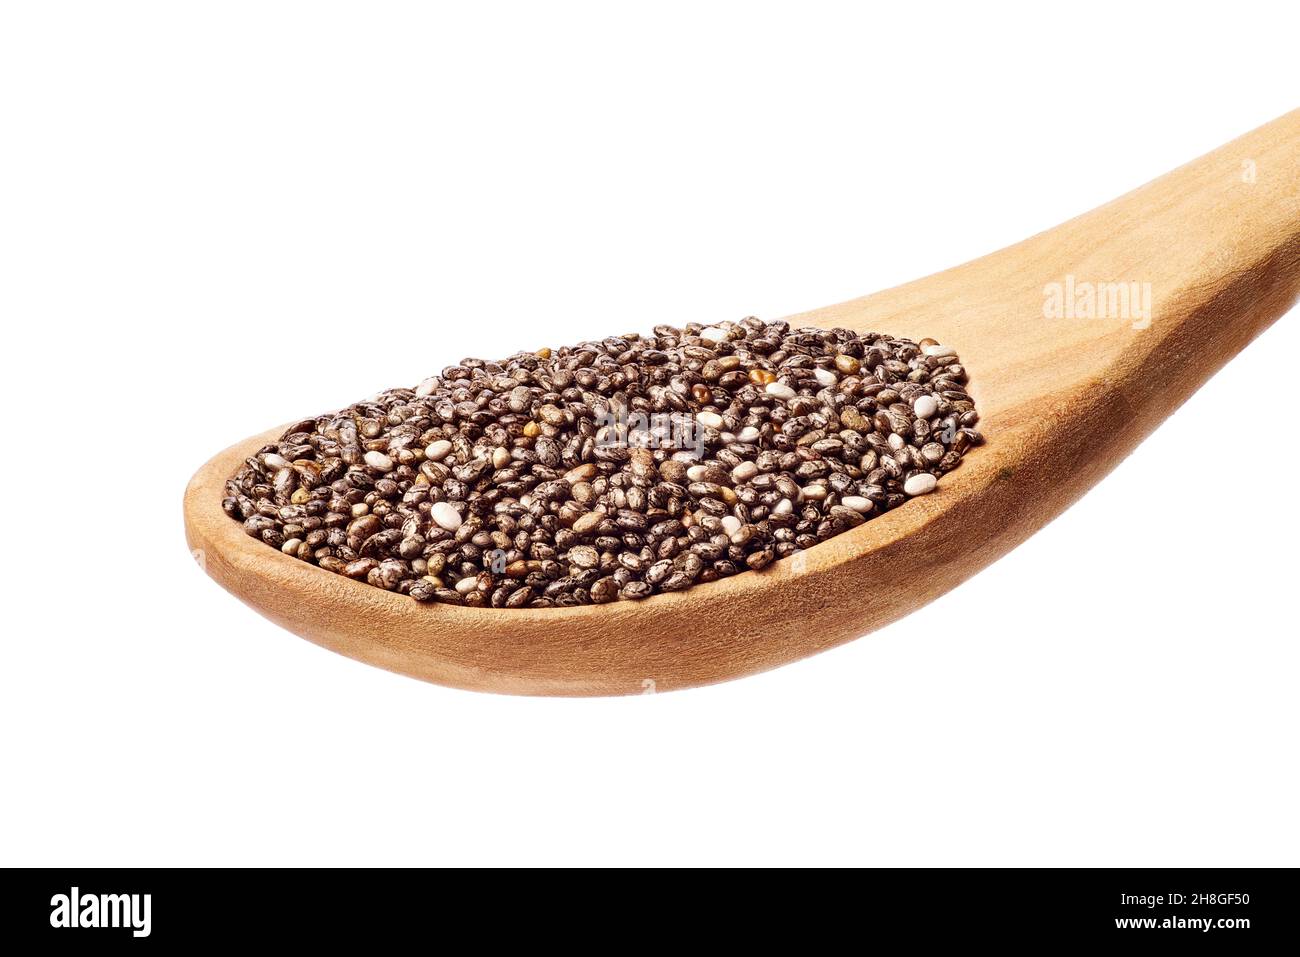 Chia seeds in wooden spoon on white background Stock Photo